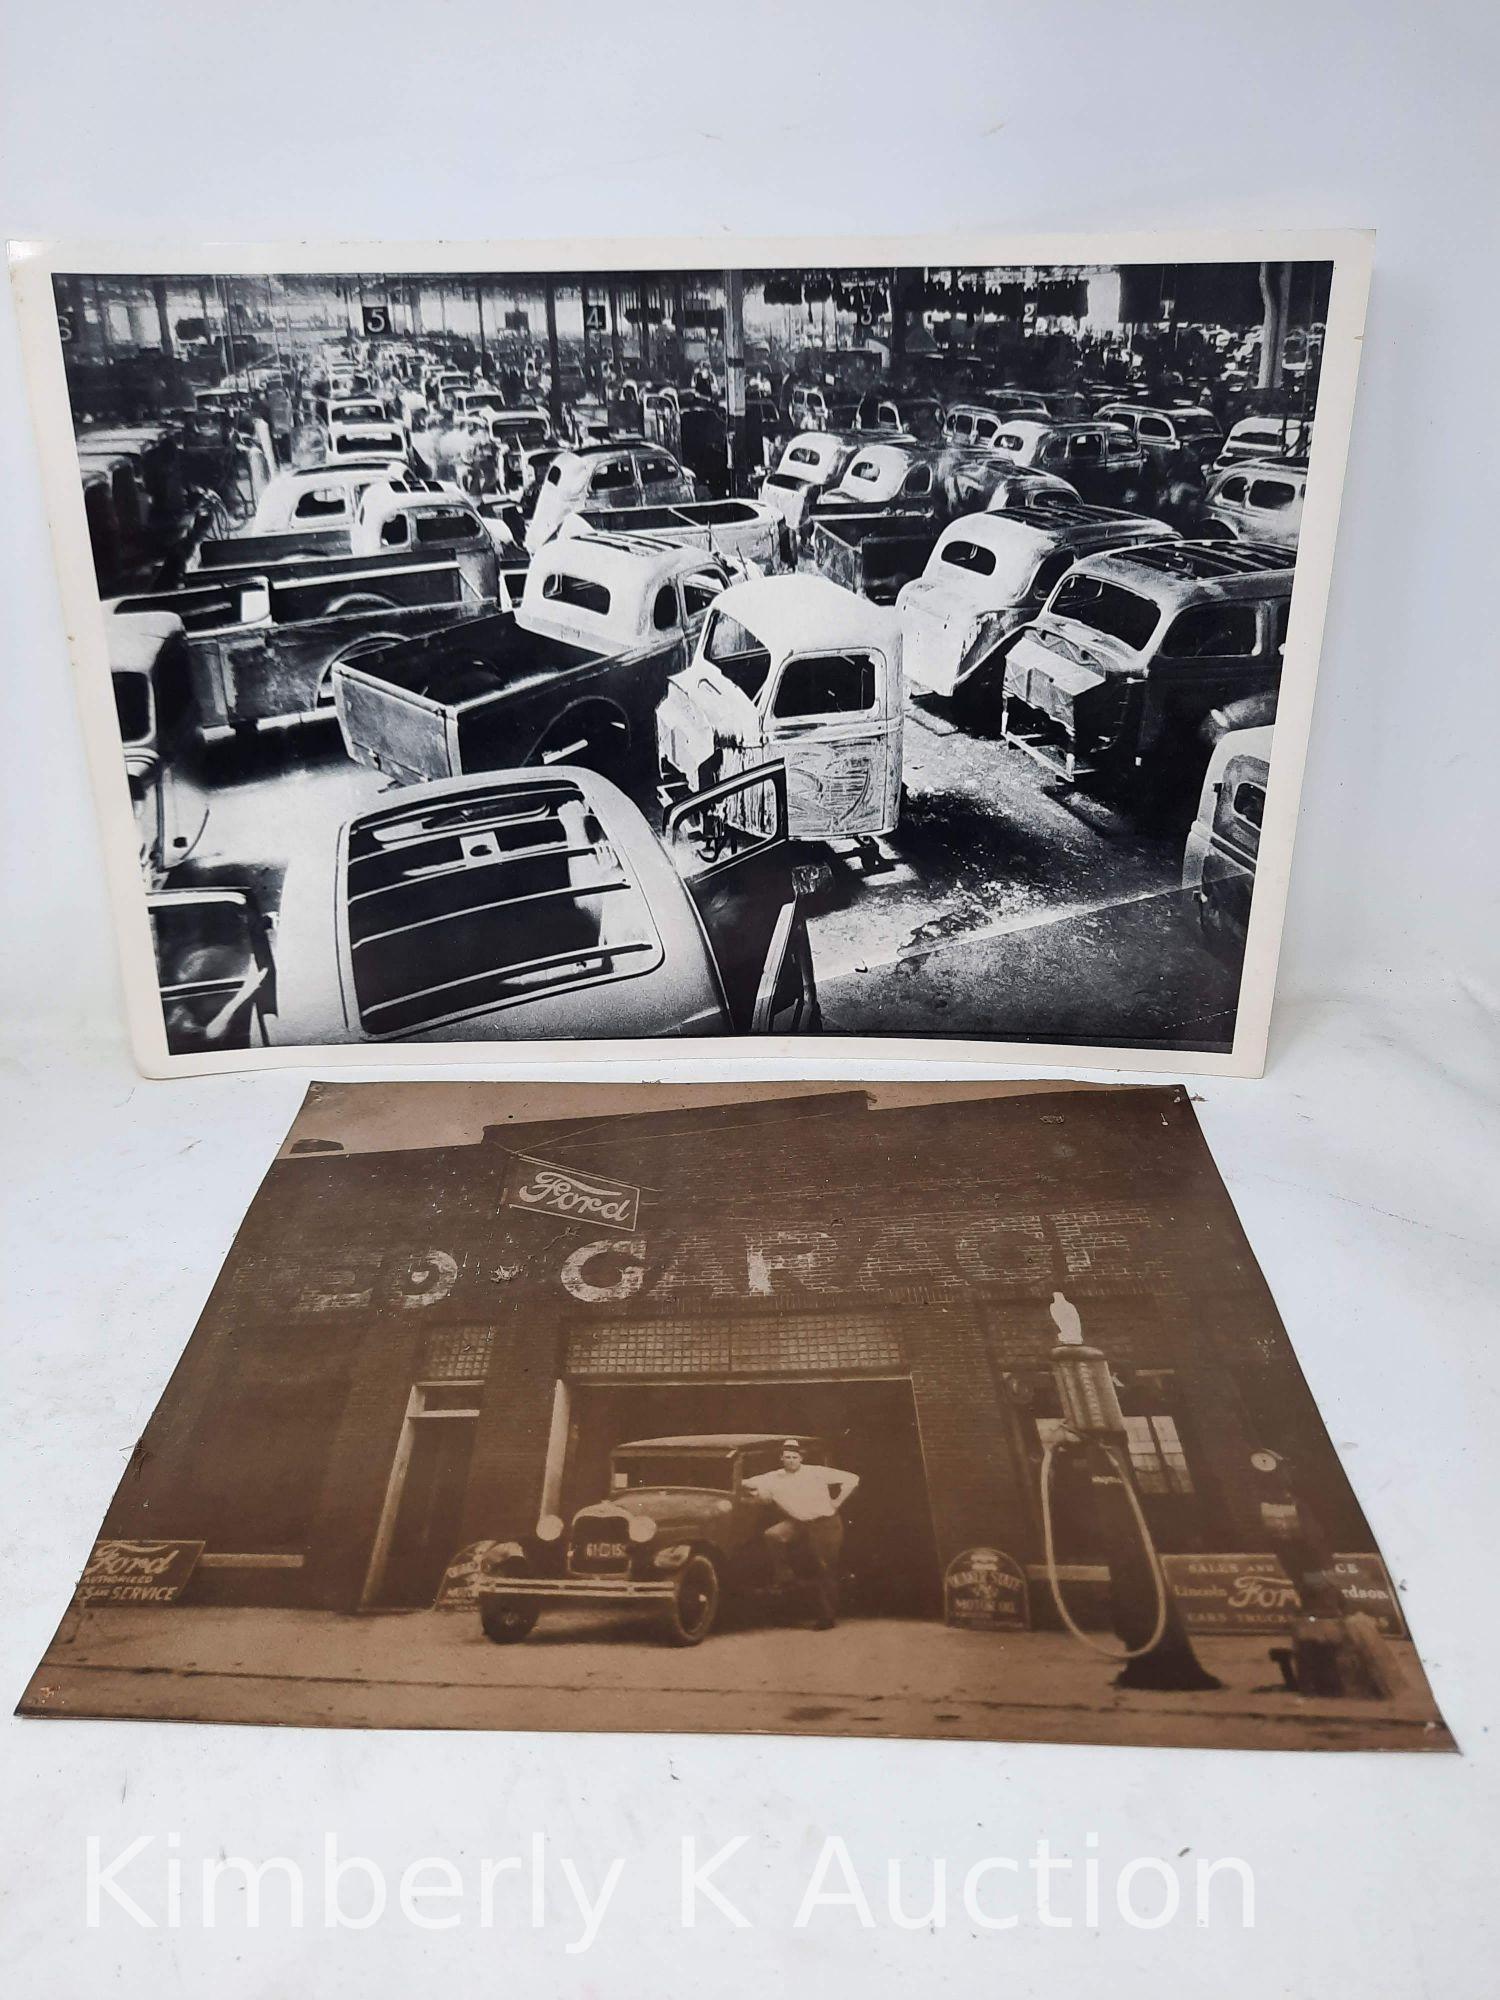 9 Early Car and Advertising Related Prints/Photos